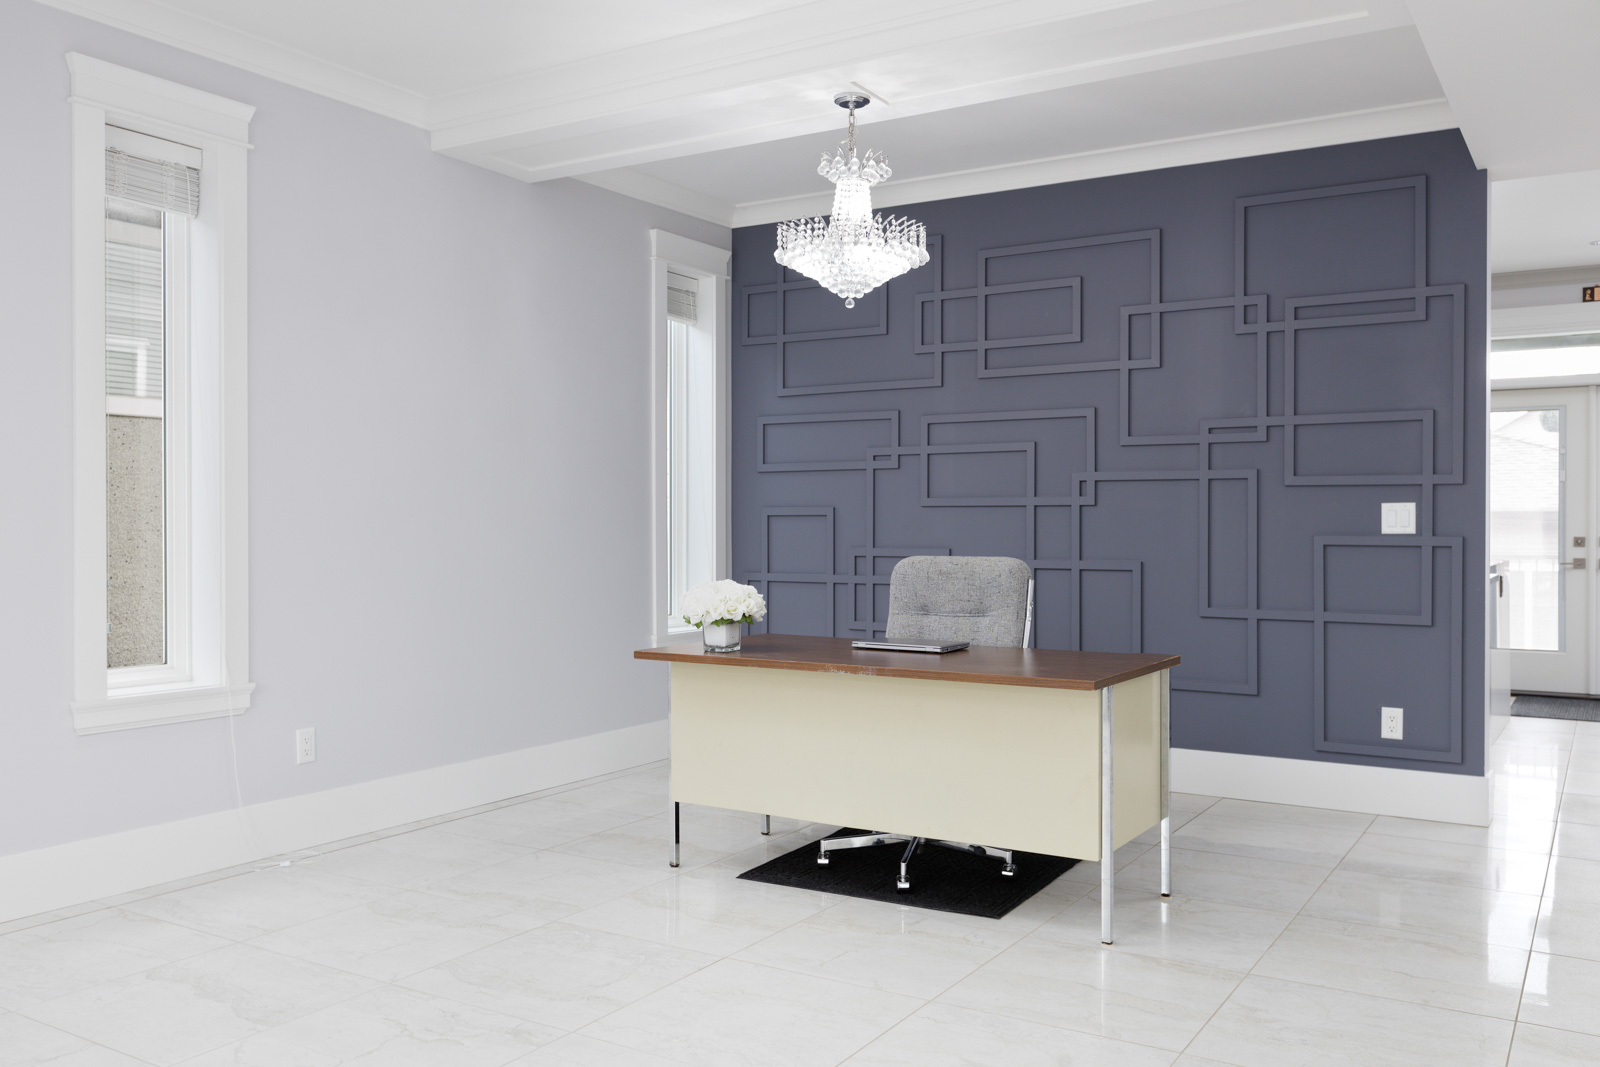 textured dark blue wall with chandelier and tiled floors